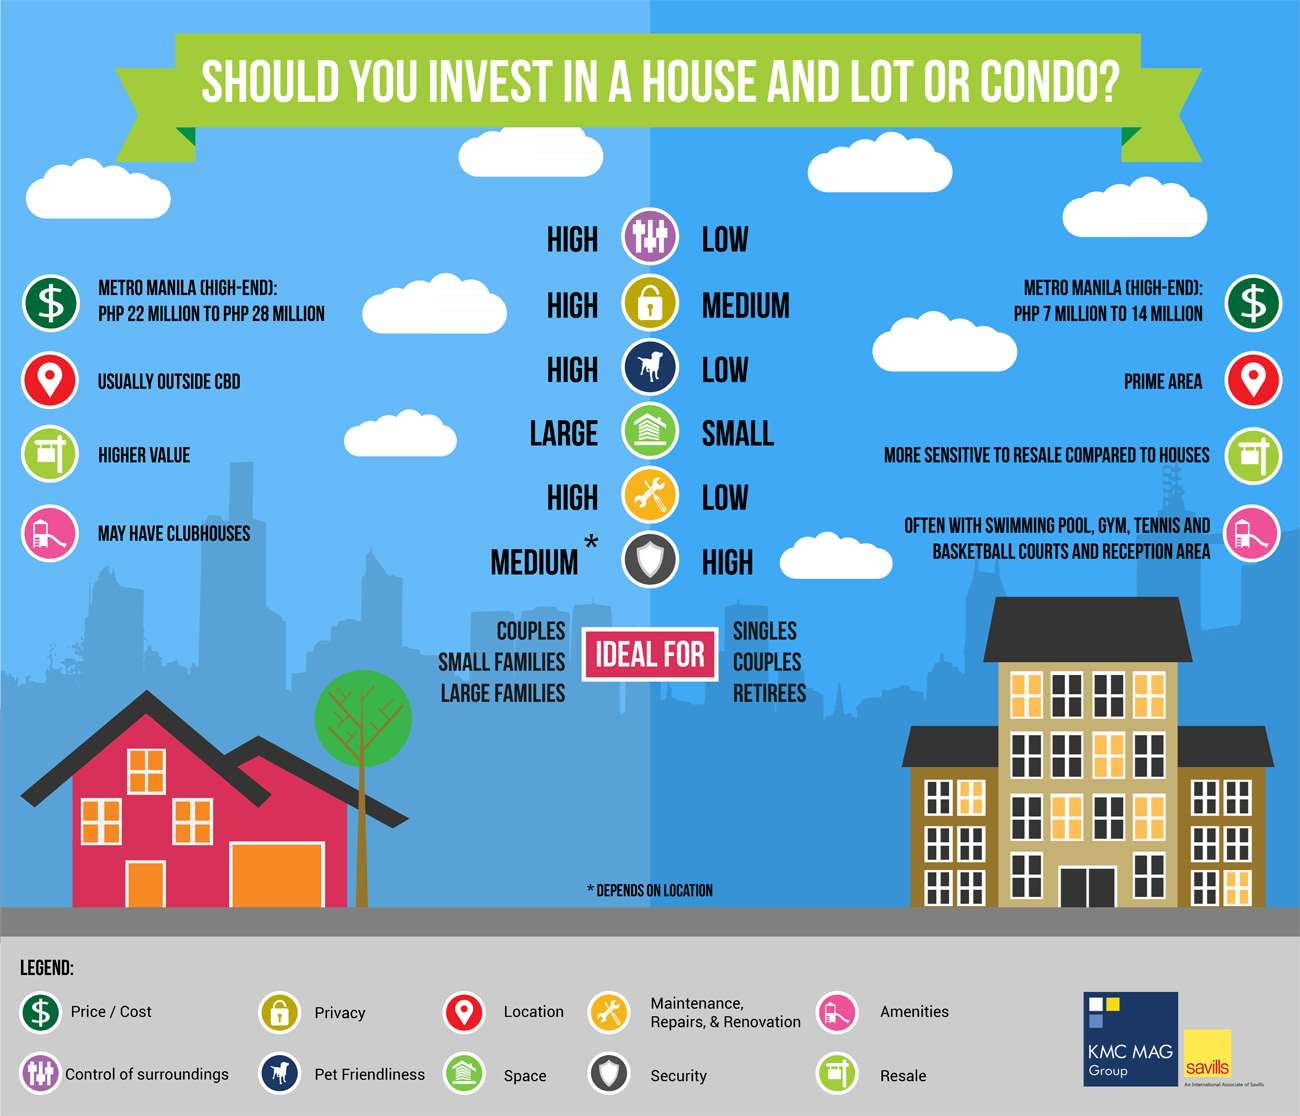 House vs. Condo: Which is a better investment? (Infographic)